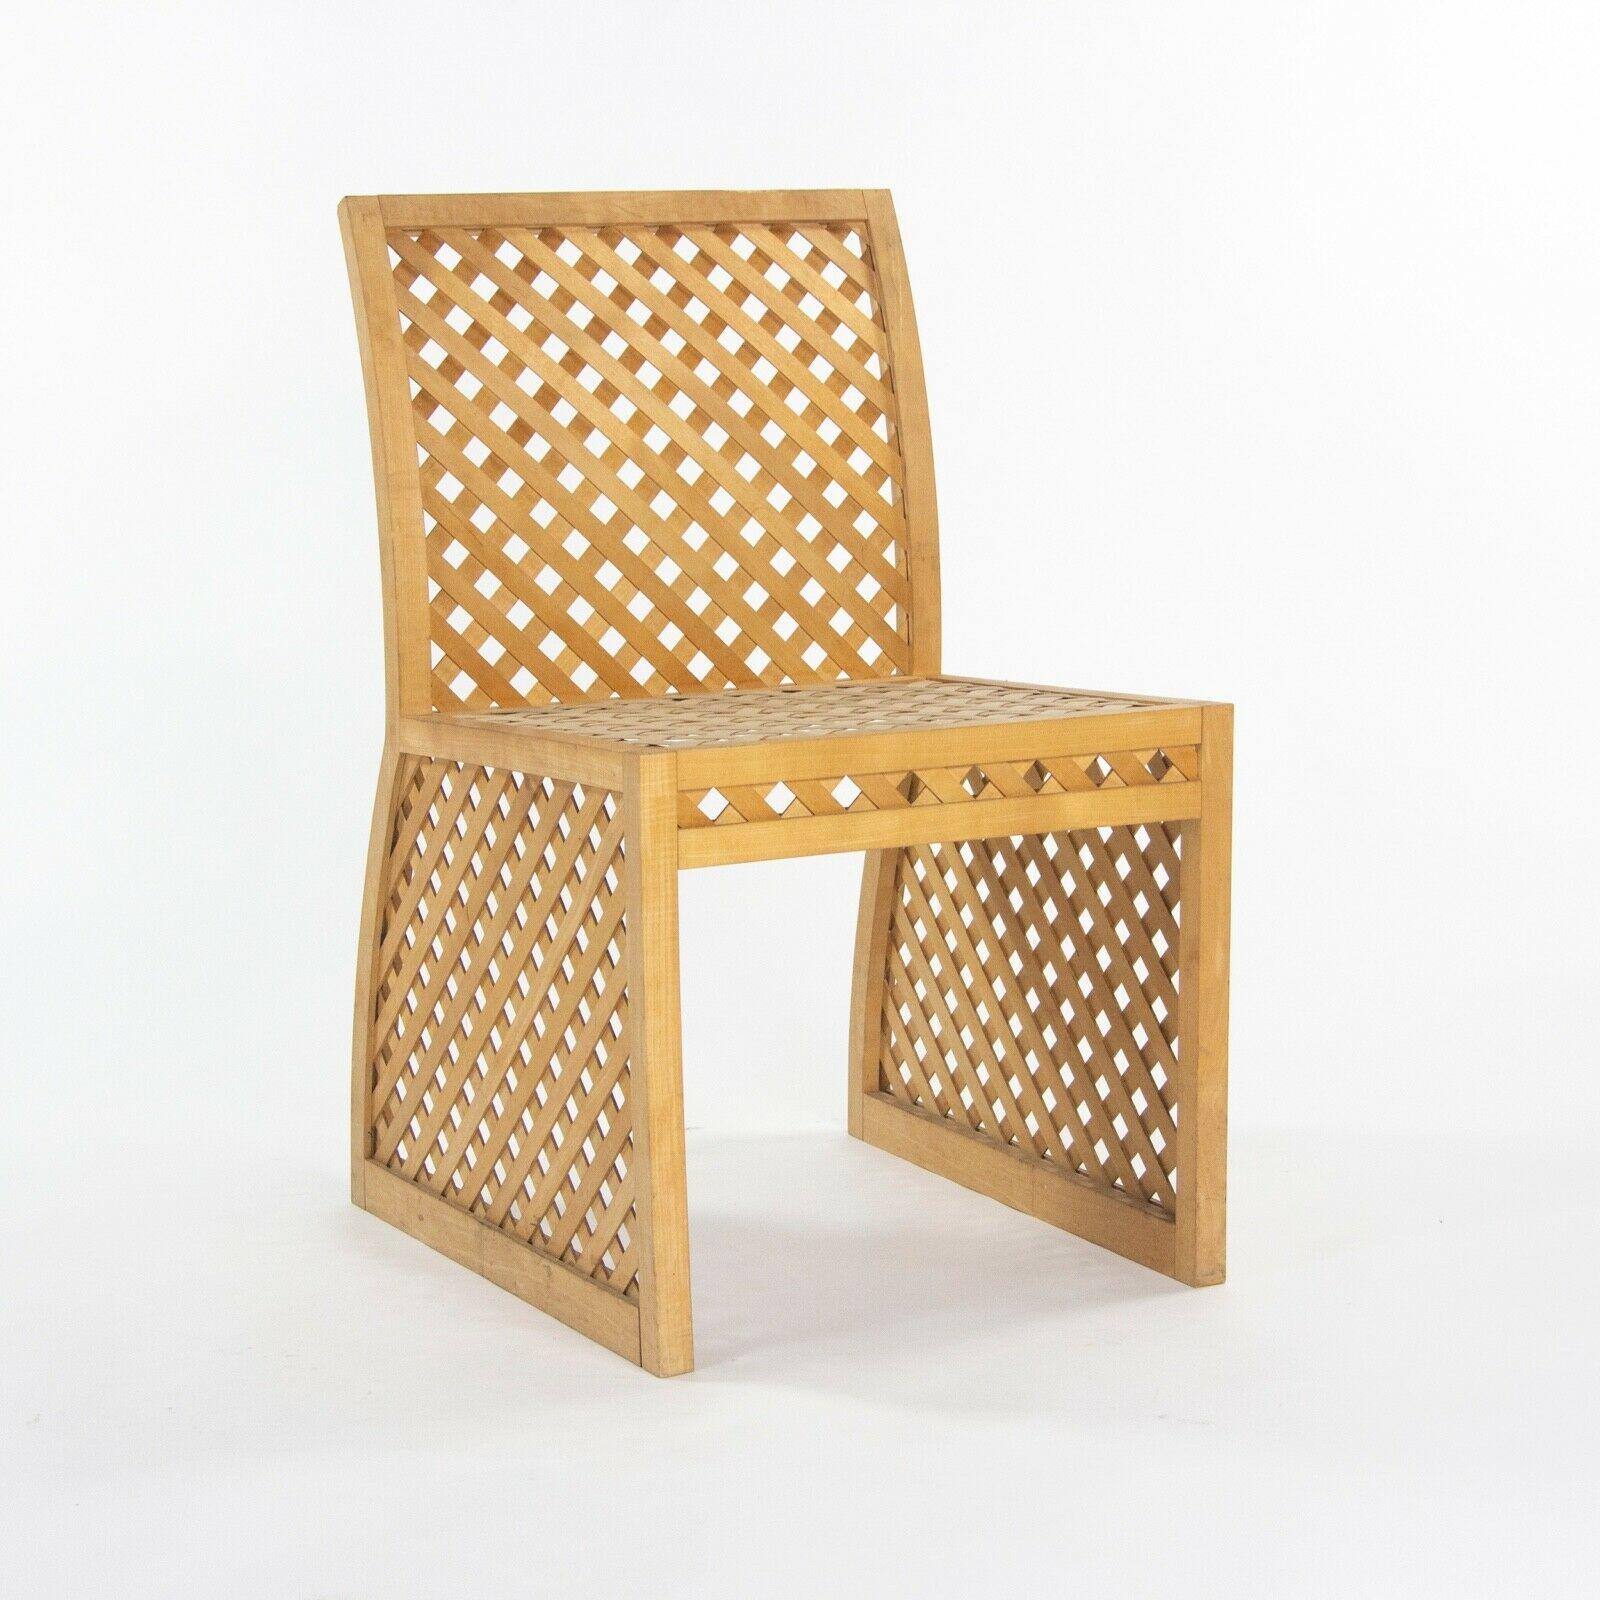 1985 Prototype Richard Schultz Wooden Outdoor Collection Dining Chair 3